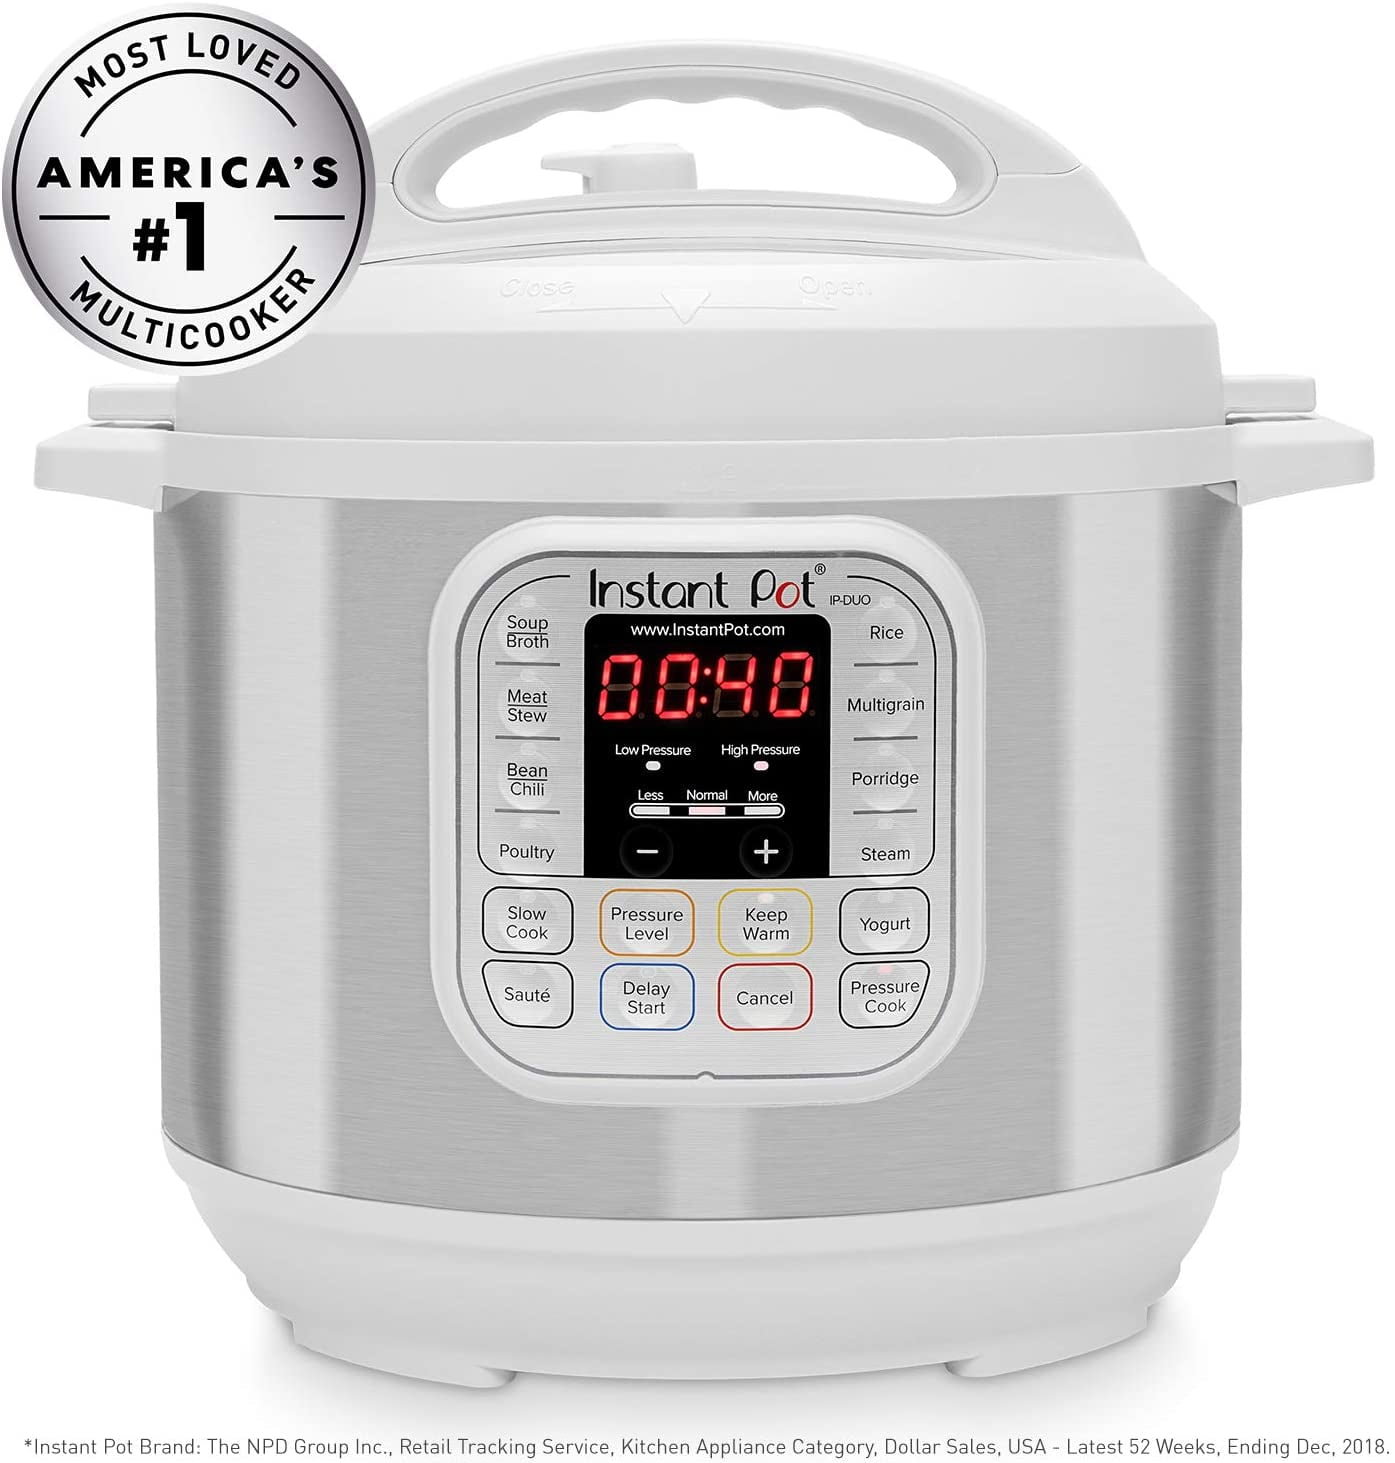  Instant Pot Duo 7-in-1 Electric Pressure Cooker, Slow Cooker,  Rice Cooker, Steamer, Sauté, Yogurt Maker, Warmer & Sterilizer, Includes  App With Over 800 Recipes, Stainless Steel, 8 Quart: Home & Kitchen